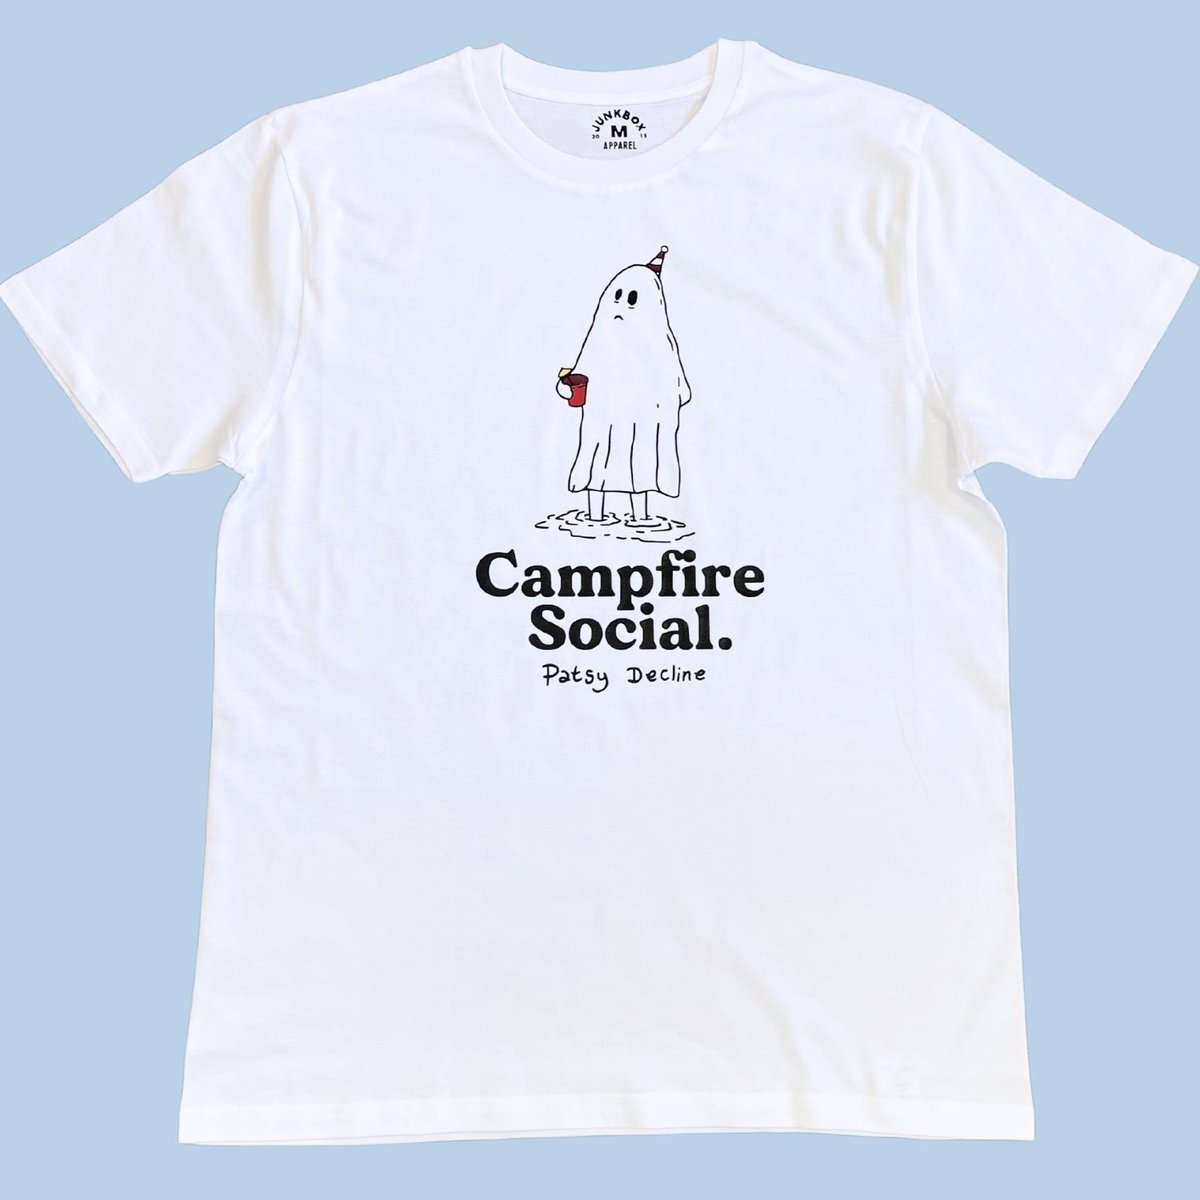 It’s #bandcampfriday and we have new limited T-shirts for Patsy Decline! campfiresocial.bandcamp.com/merch T-shirts by @junkbox Design by @edacheanimation Link, as always, in the bio